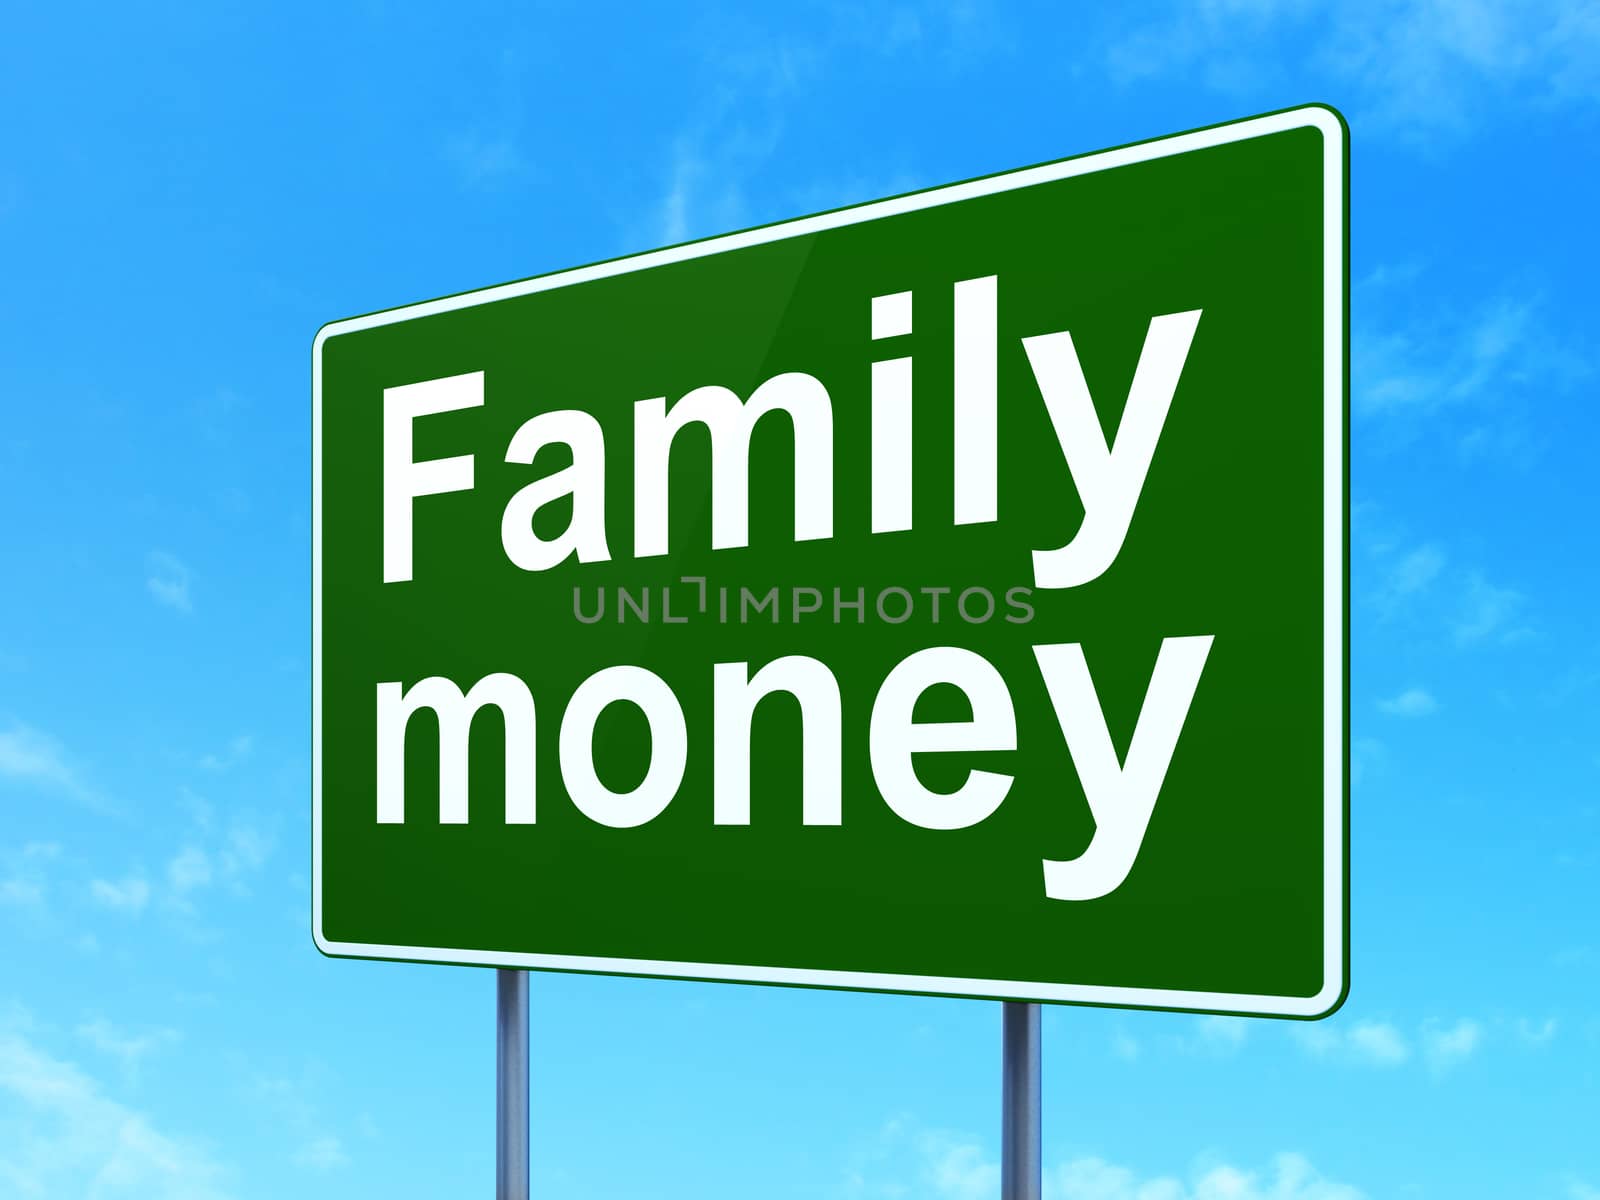 Money concept: Family Money on green road highway sign, clear blue sky background, 3d render